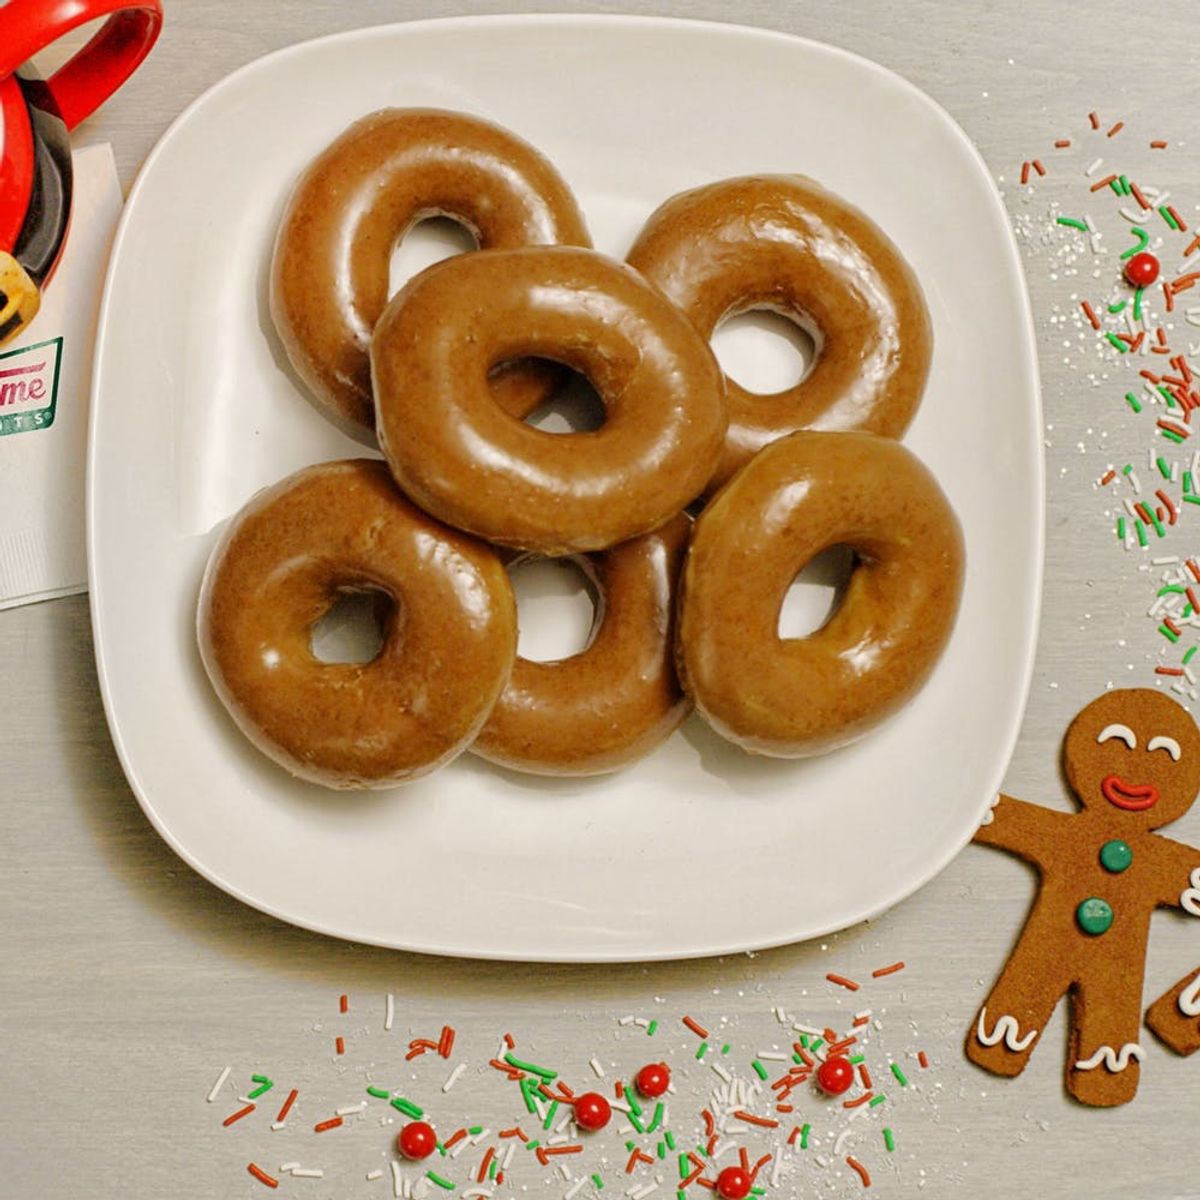 Krispy Kreme Just Introduced the Holiday Donut of Your Dreams… But There’s a Catch